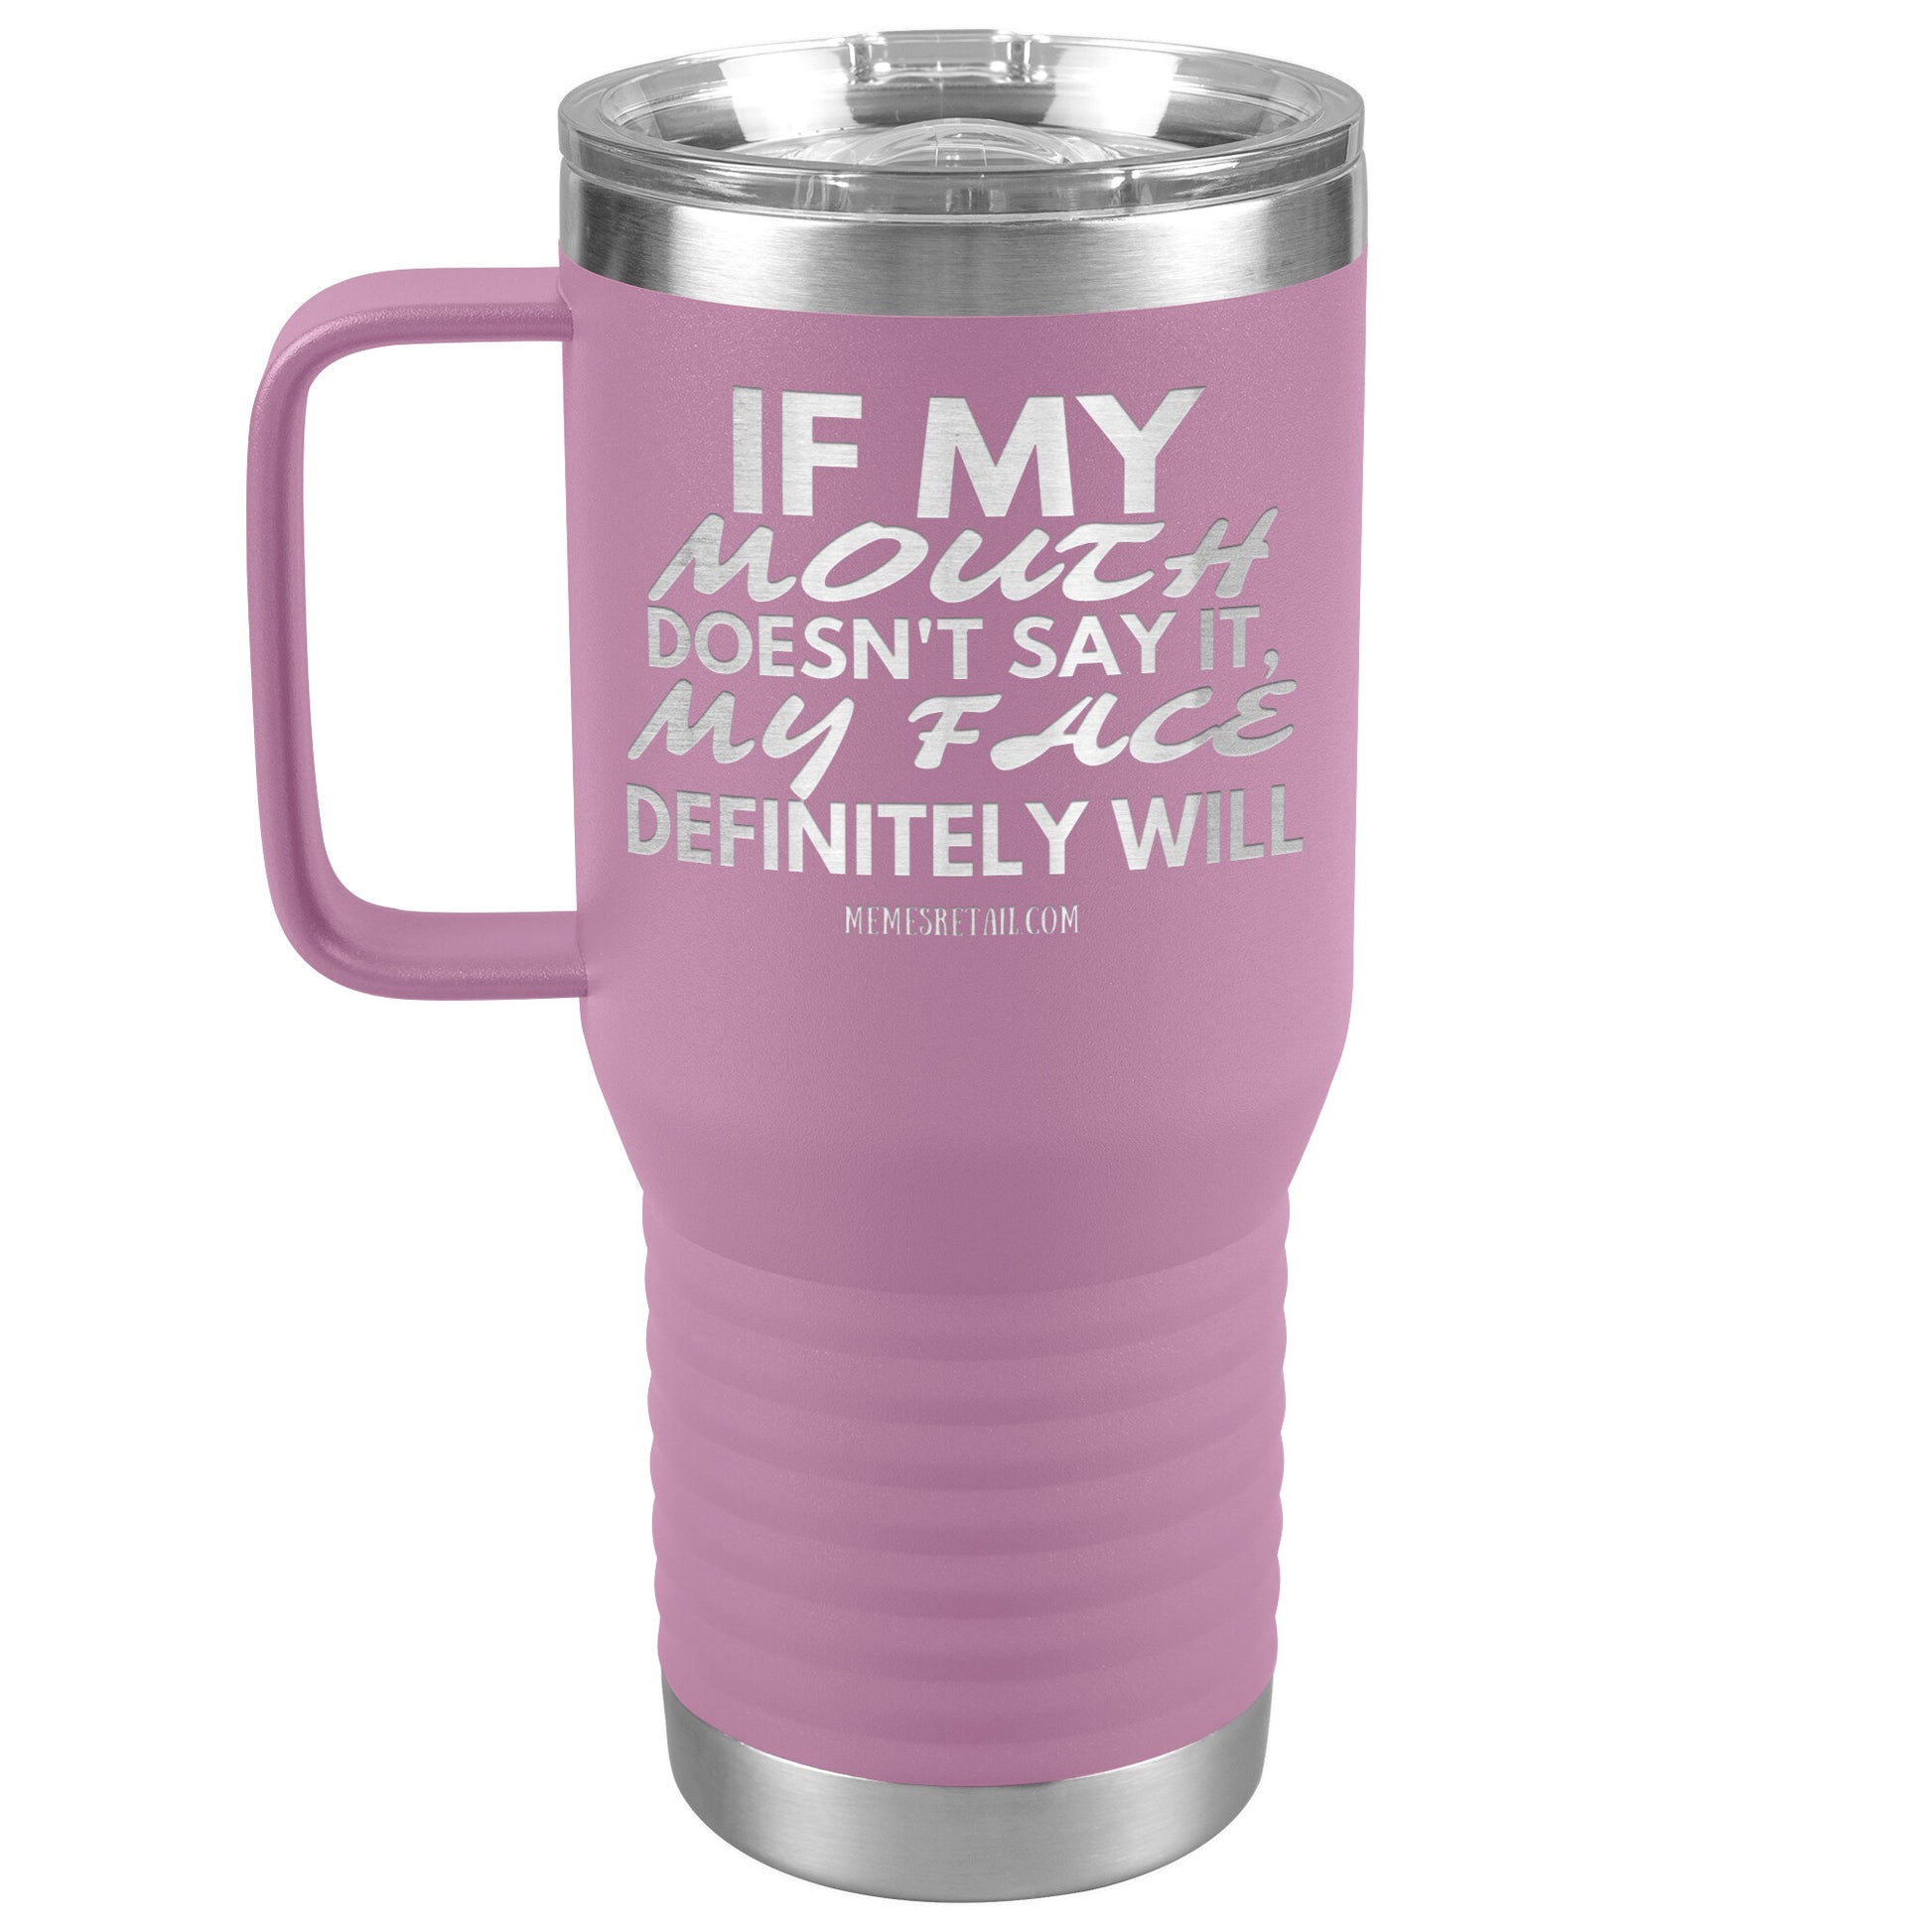 If my mouth doesn't say it, my face definitely will Tumblers, 20oz Travel Tumbler / Light Purple - MemesRetail.com